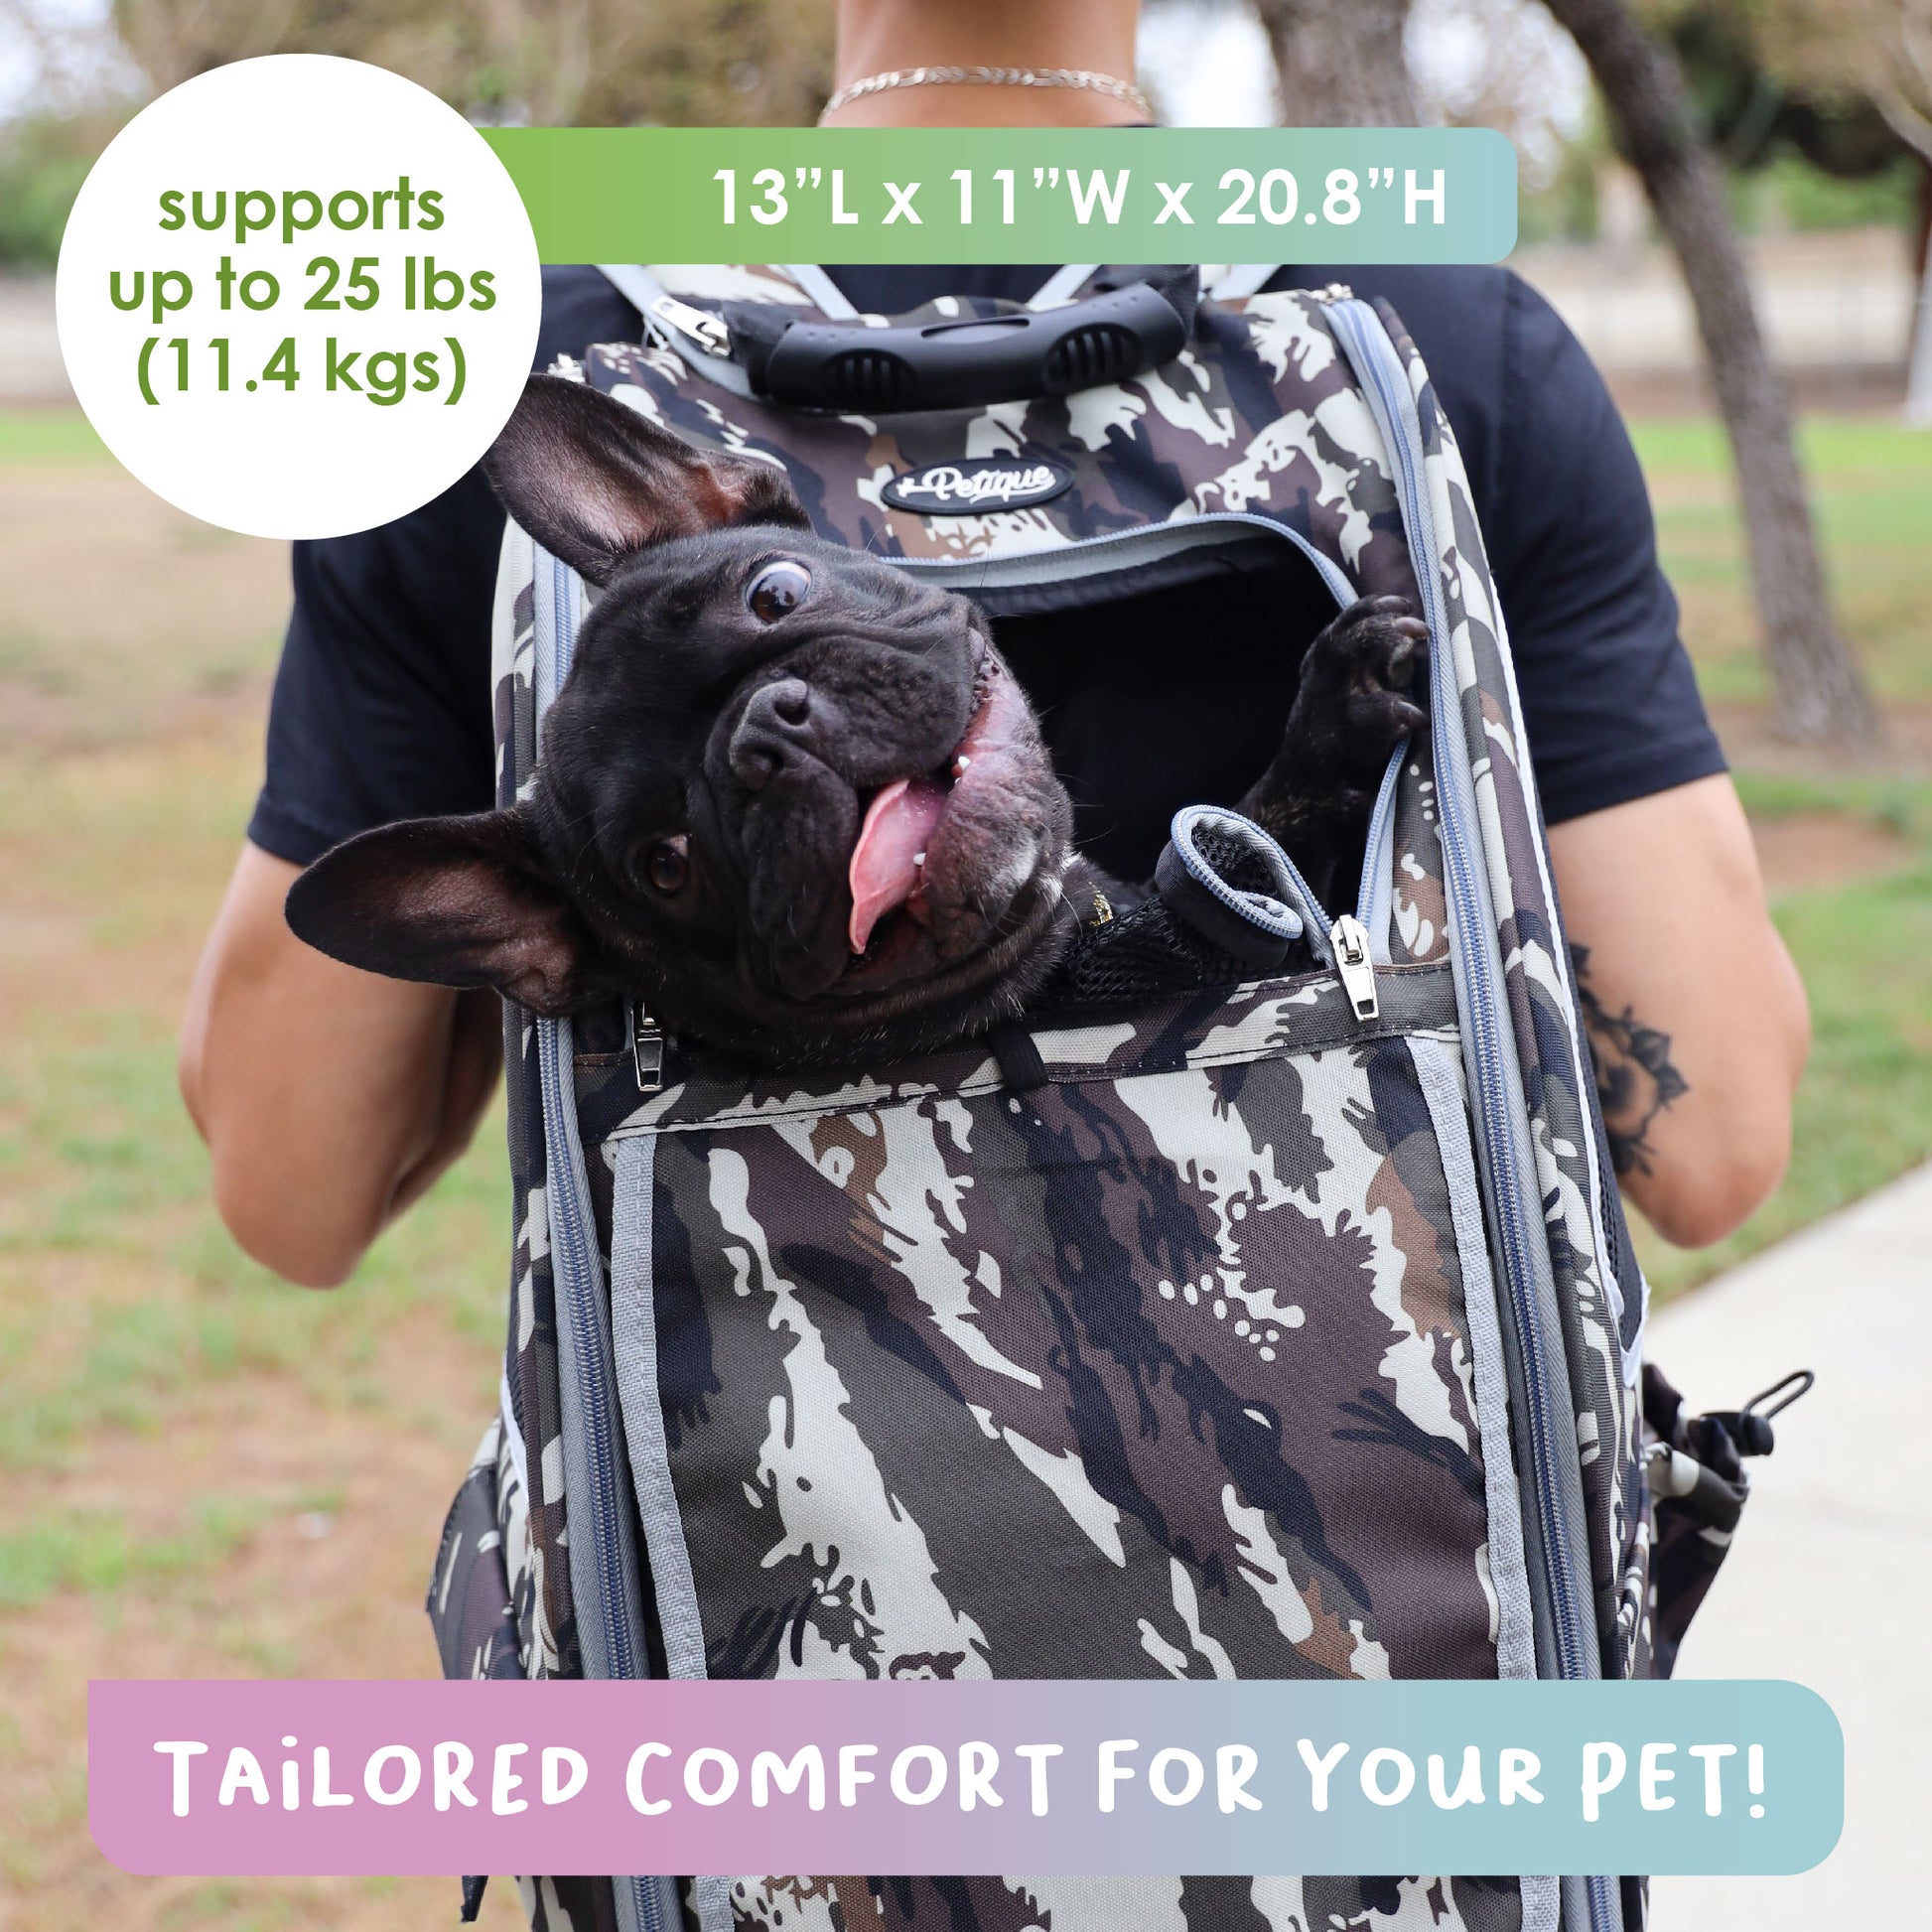 Petseek Extra Large Cat Carrier Soft Sided Folding Small Medium Dog Pet Carrier 24 inchx16.5 inchx16 inch Travel Collapsible Ventilated Comfortable